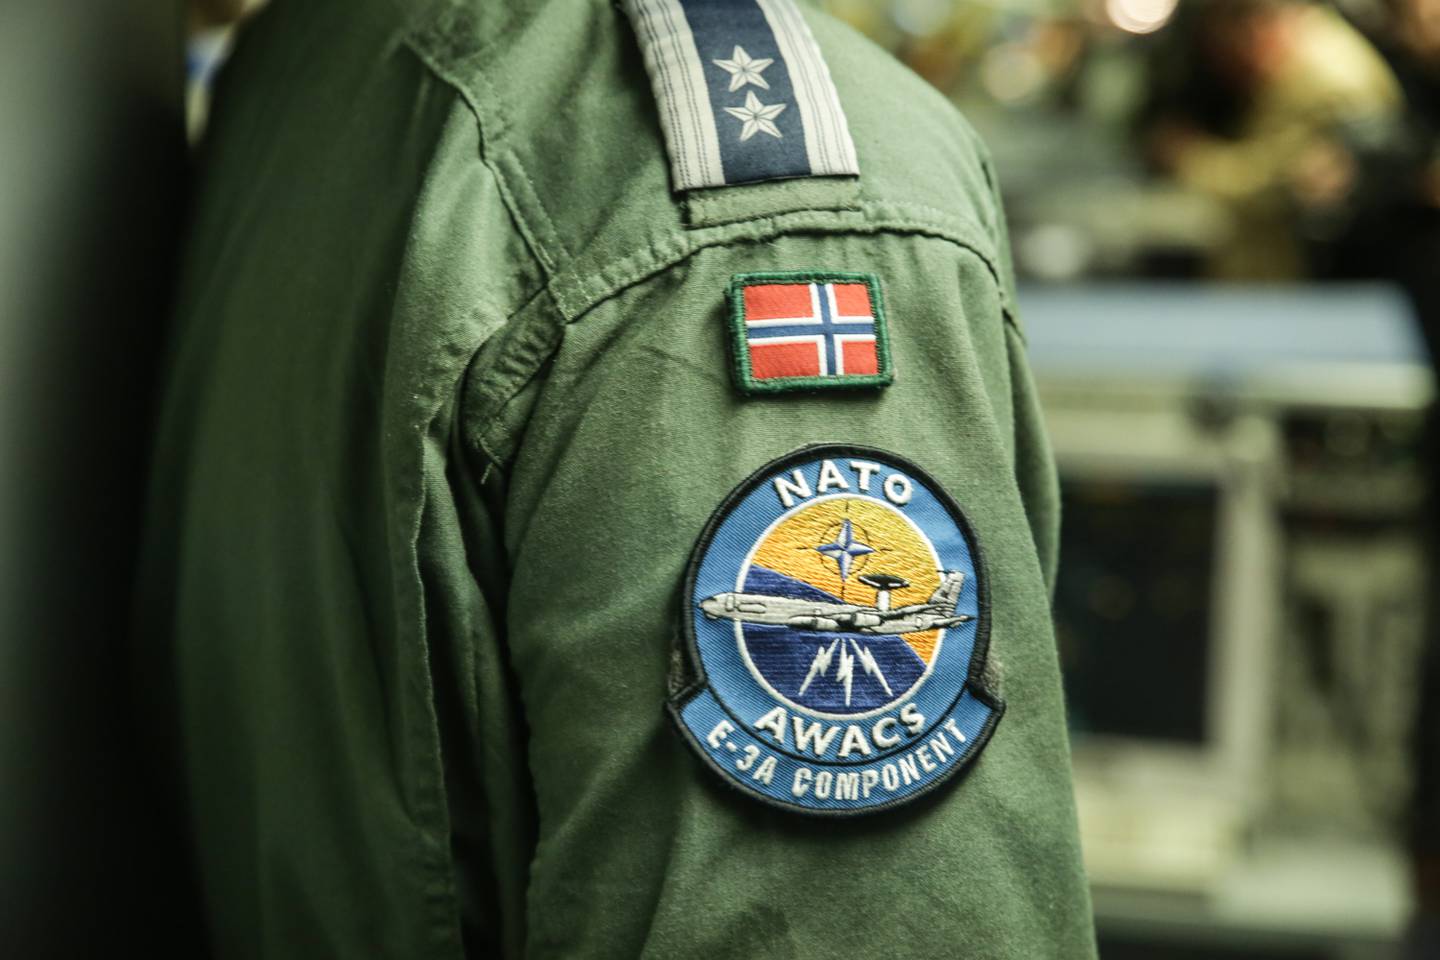 NATO AWACS division patch